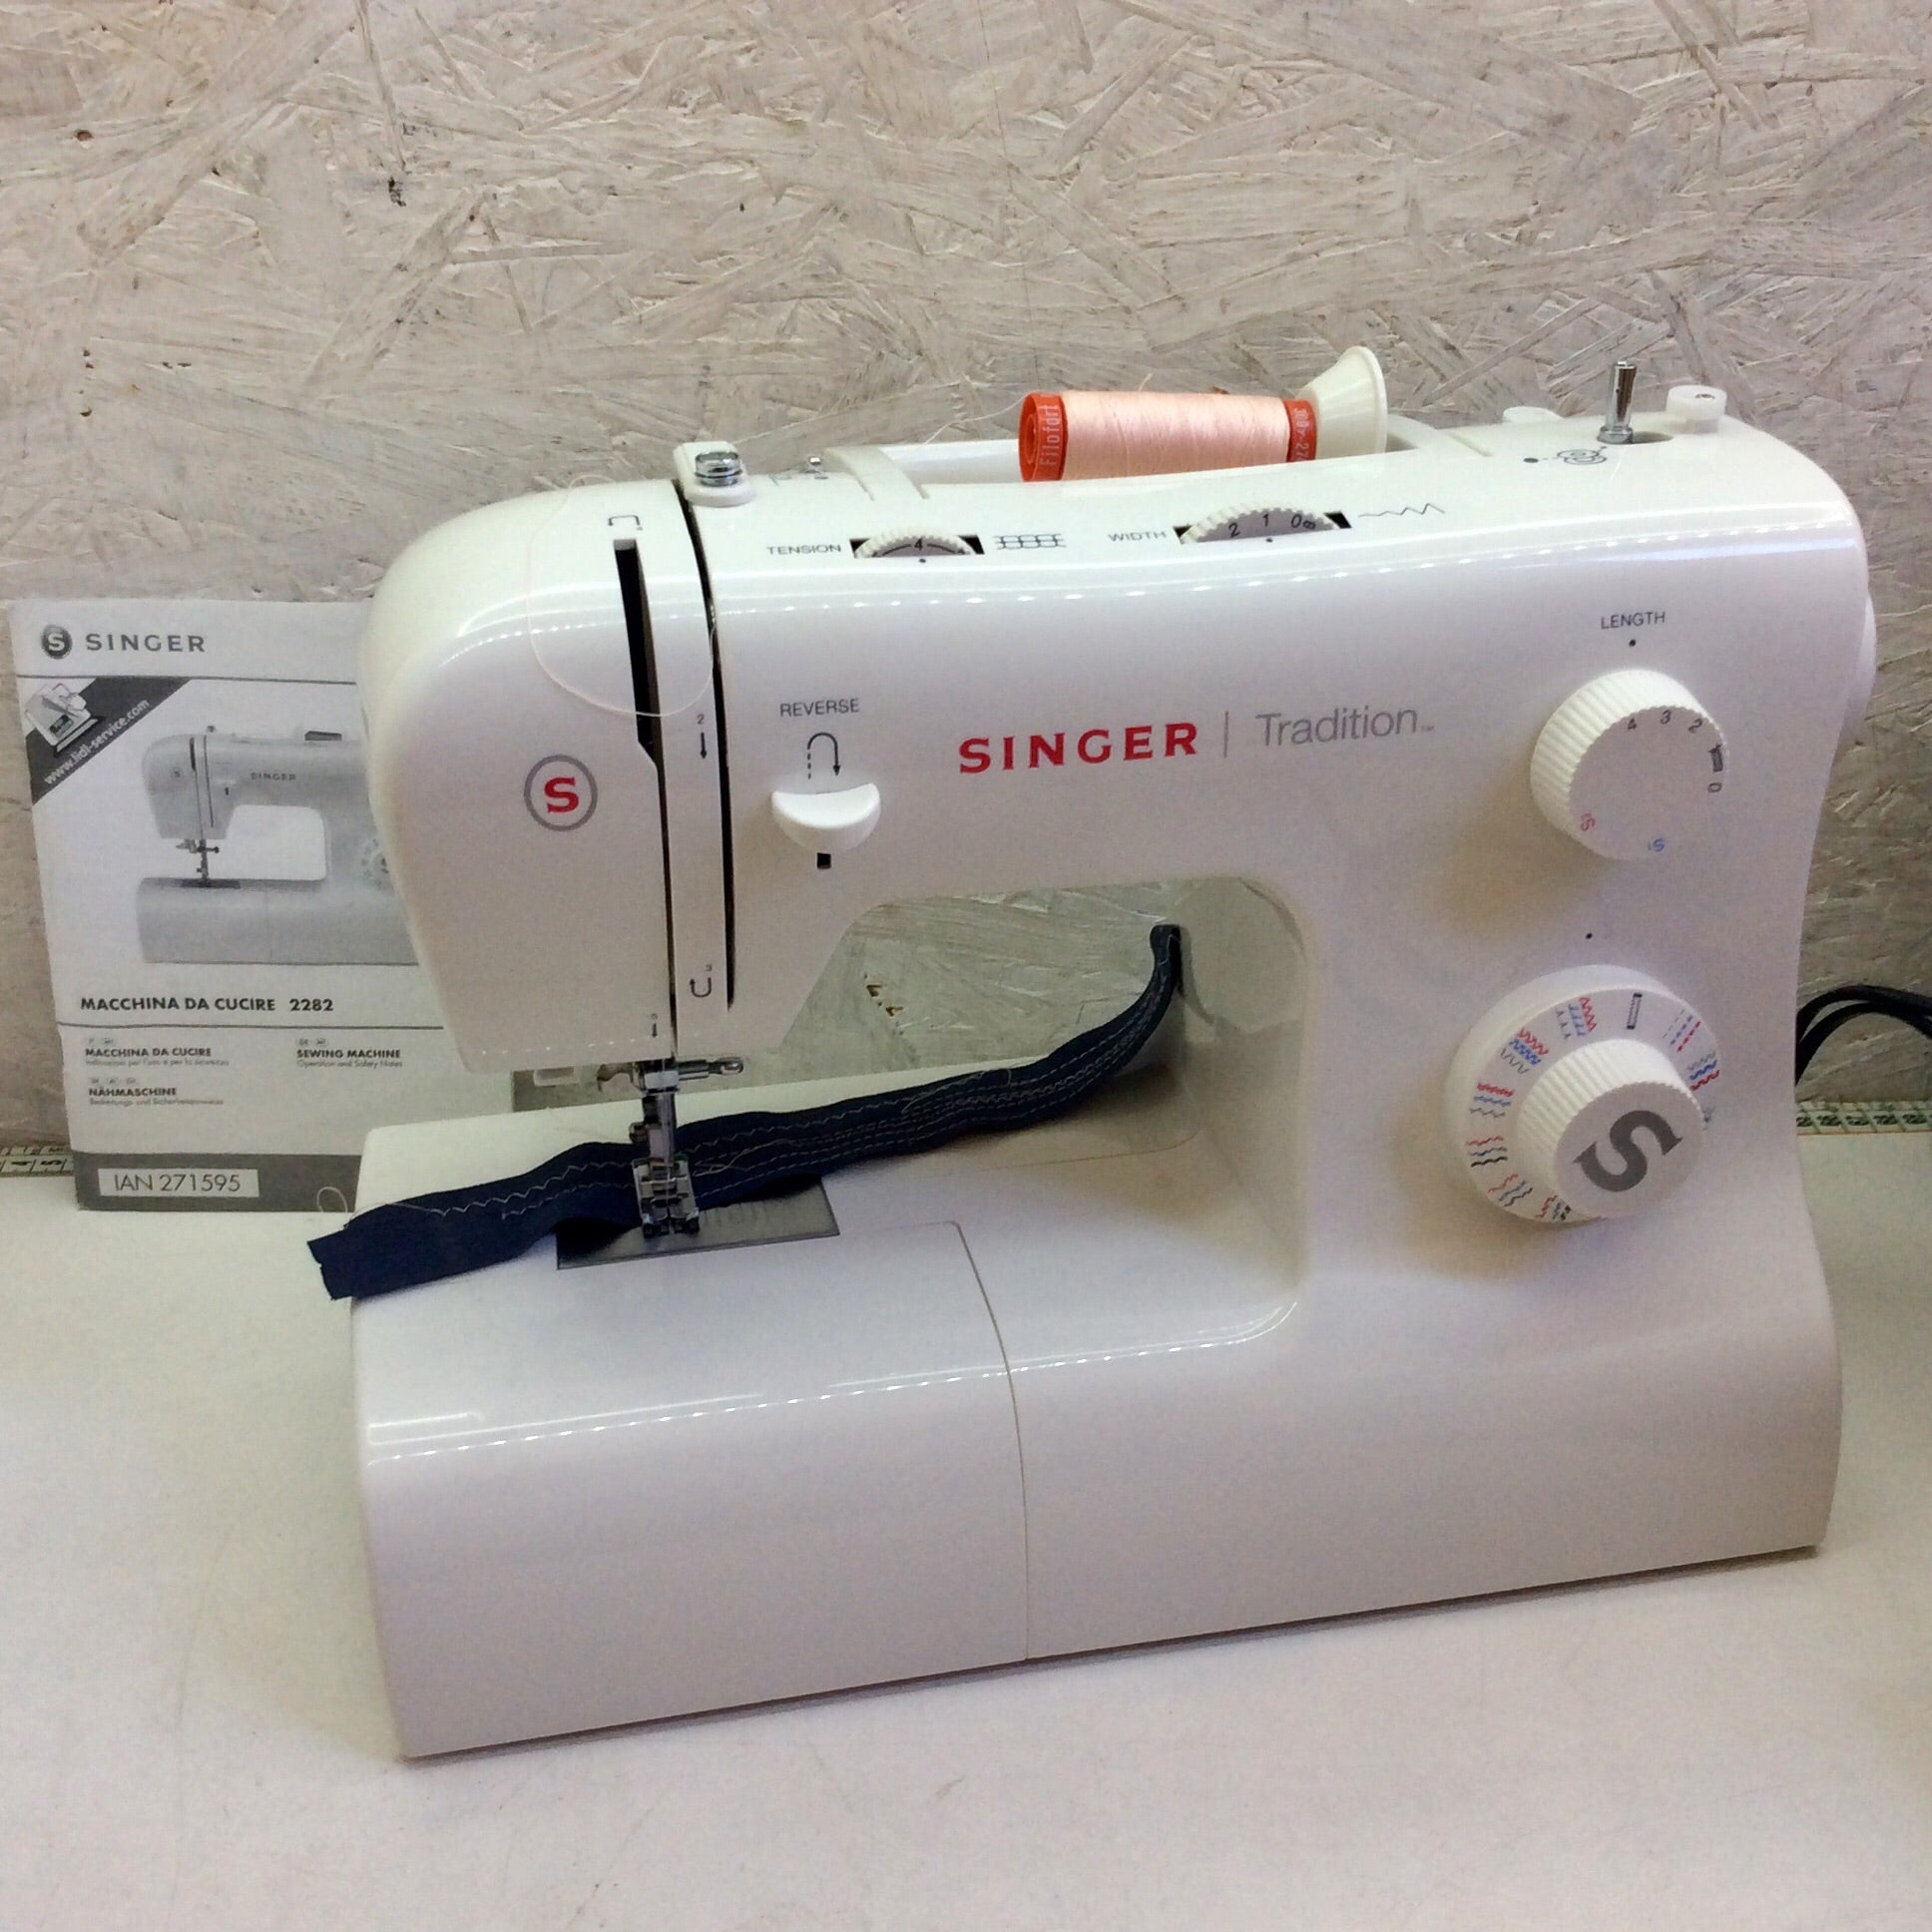 Singer Tradition 2282 - Sewing machine